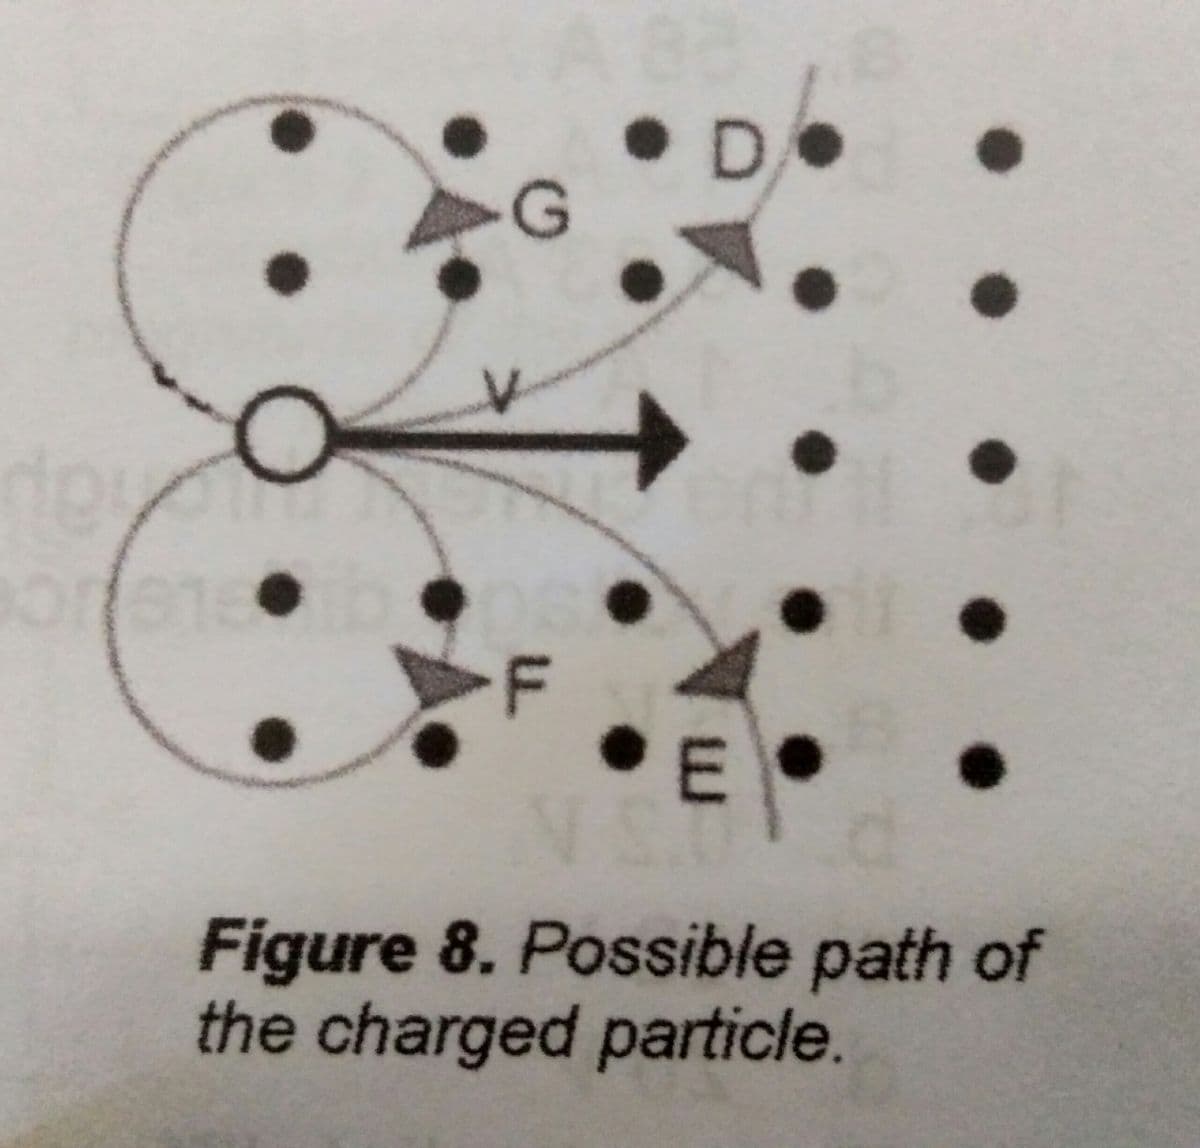 D.
G
F
Figure 8. Possible path of
the charged particle.
E.
